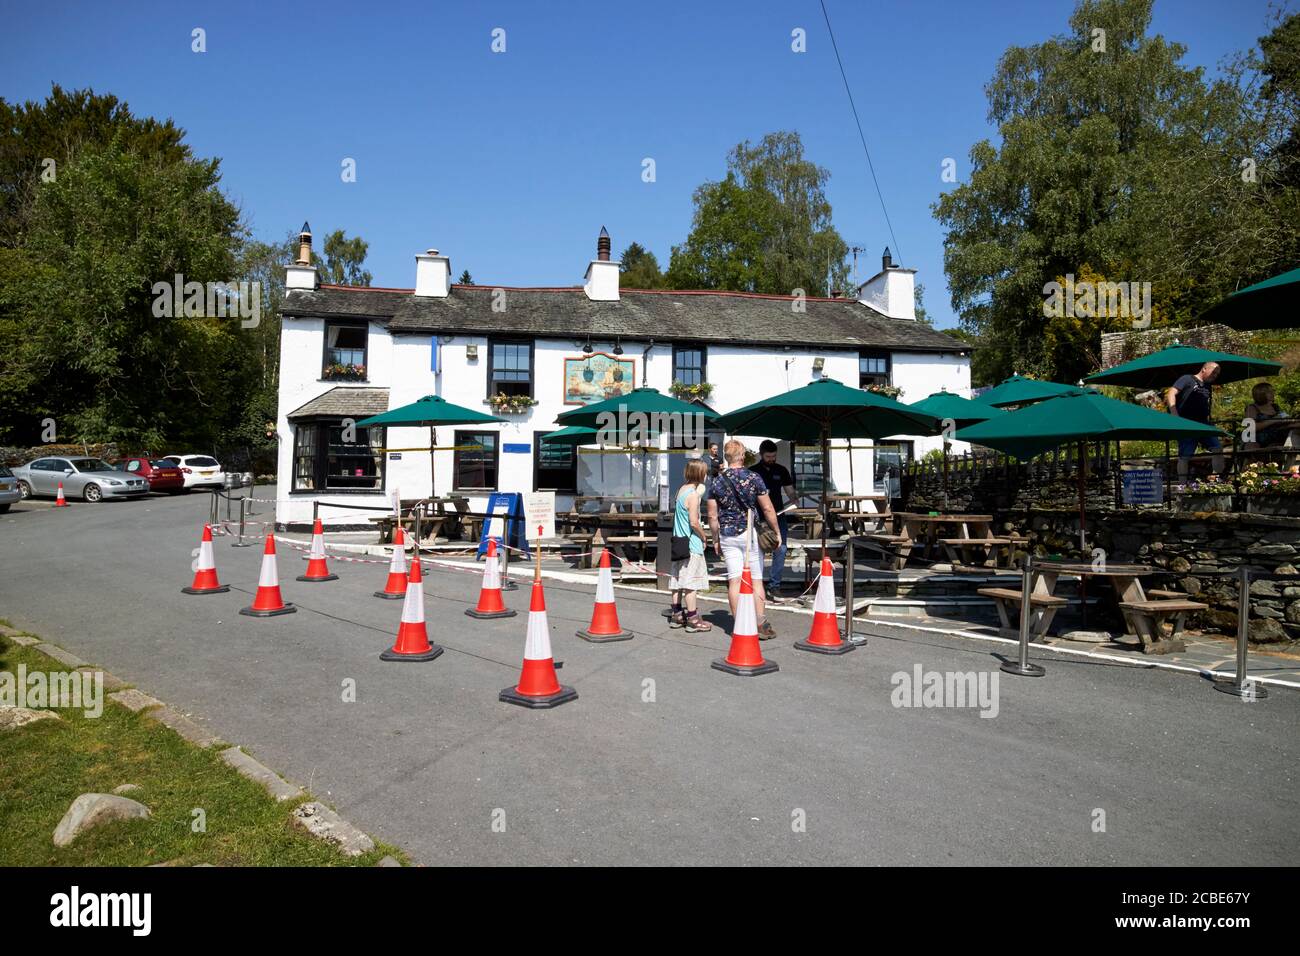 measures put in place for social distancing outside a the britannia inn pub during the covid-19 coronavirus outbreak in the lake district cumbria engl Stock Photo